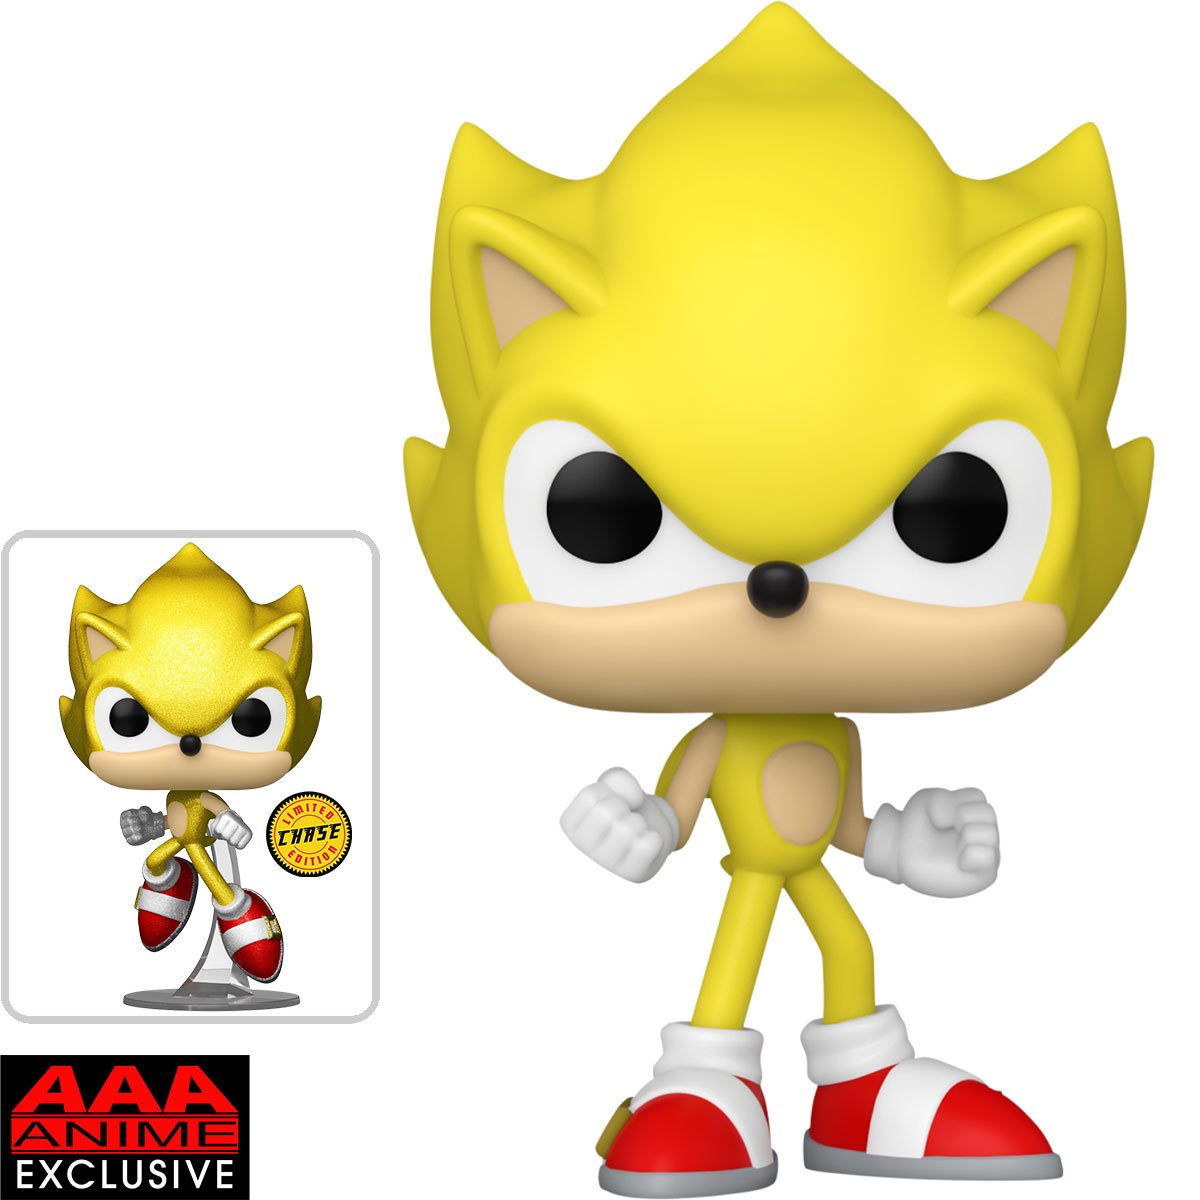 Toys Sonic - 5 Power Rings - IN A BAG - by AAA World